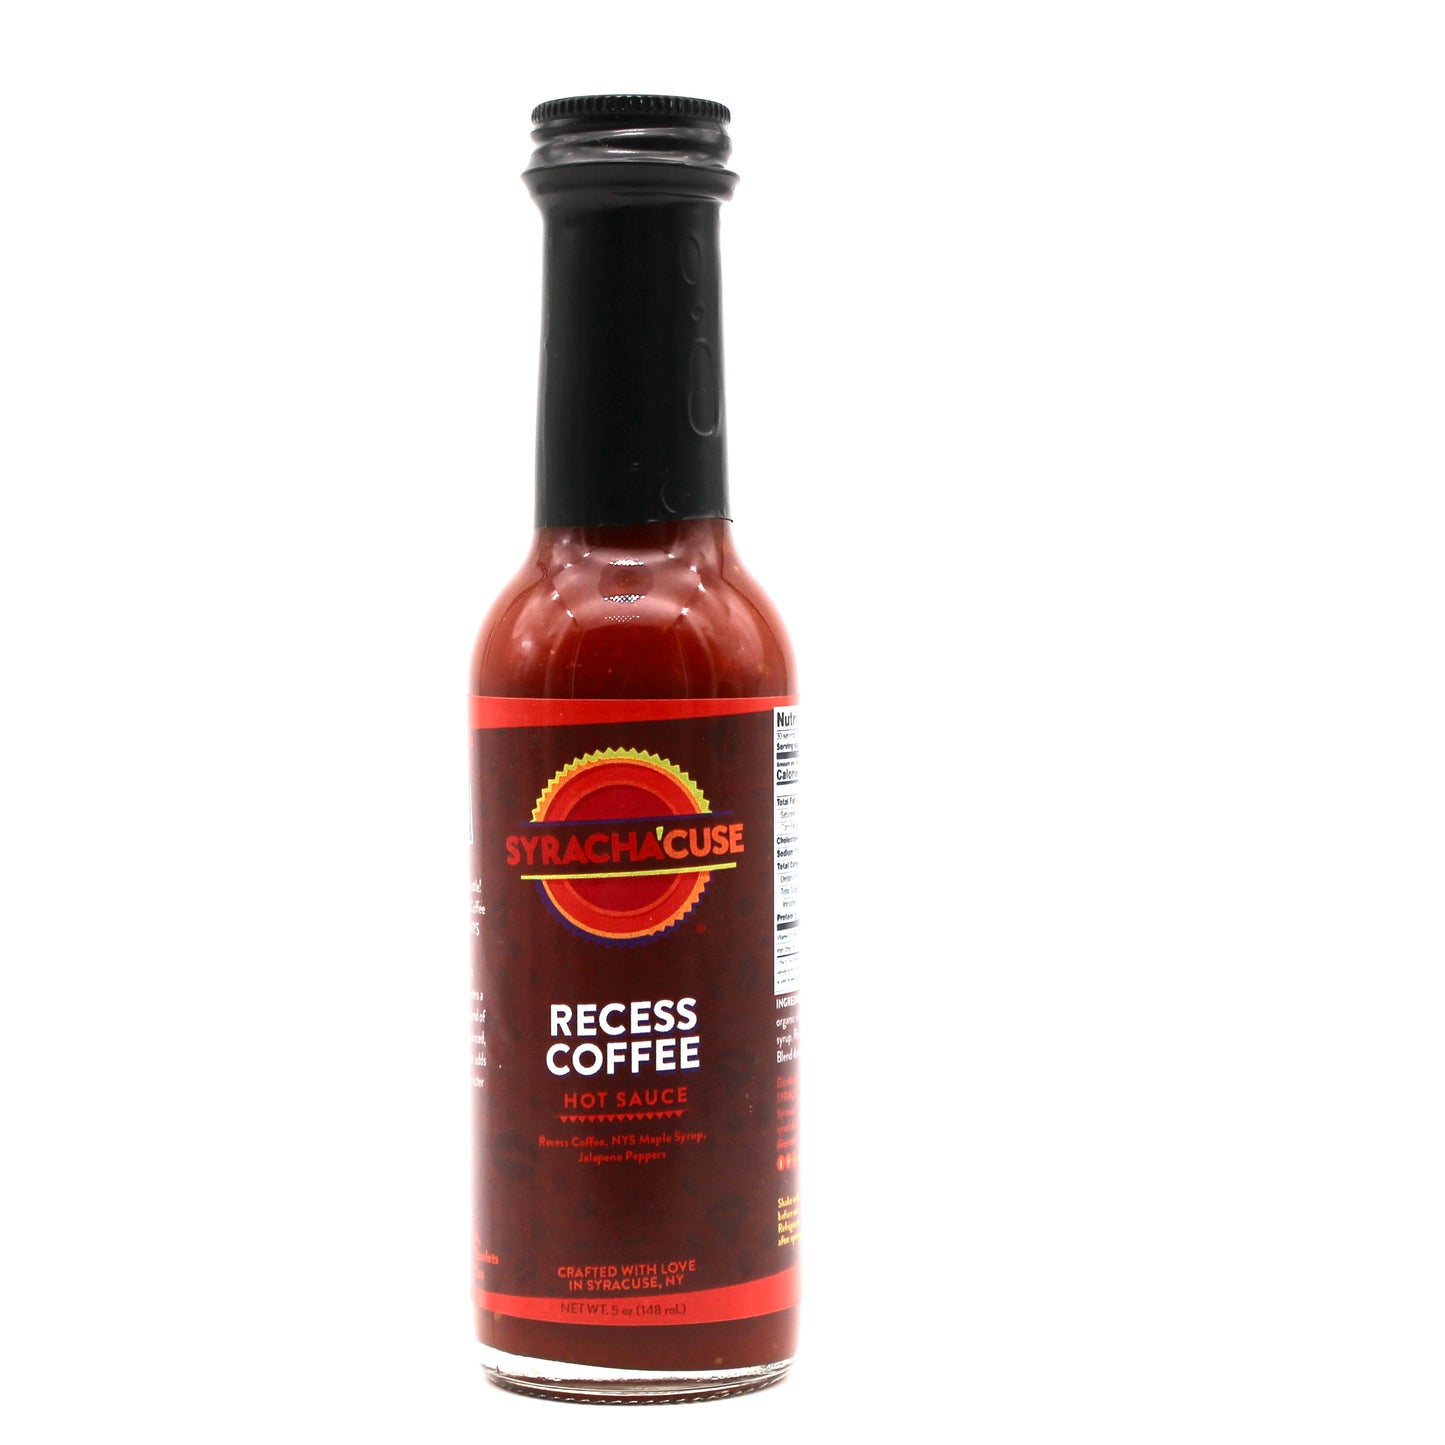 RECESS COFFEE HOT SAUCE, Your wake up call in a bottle made with Recess Coffee, Syracuse, NY